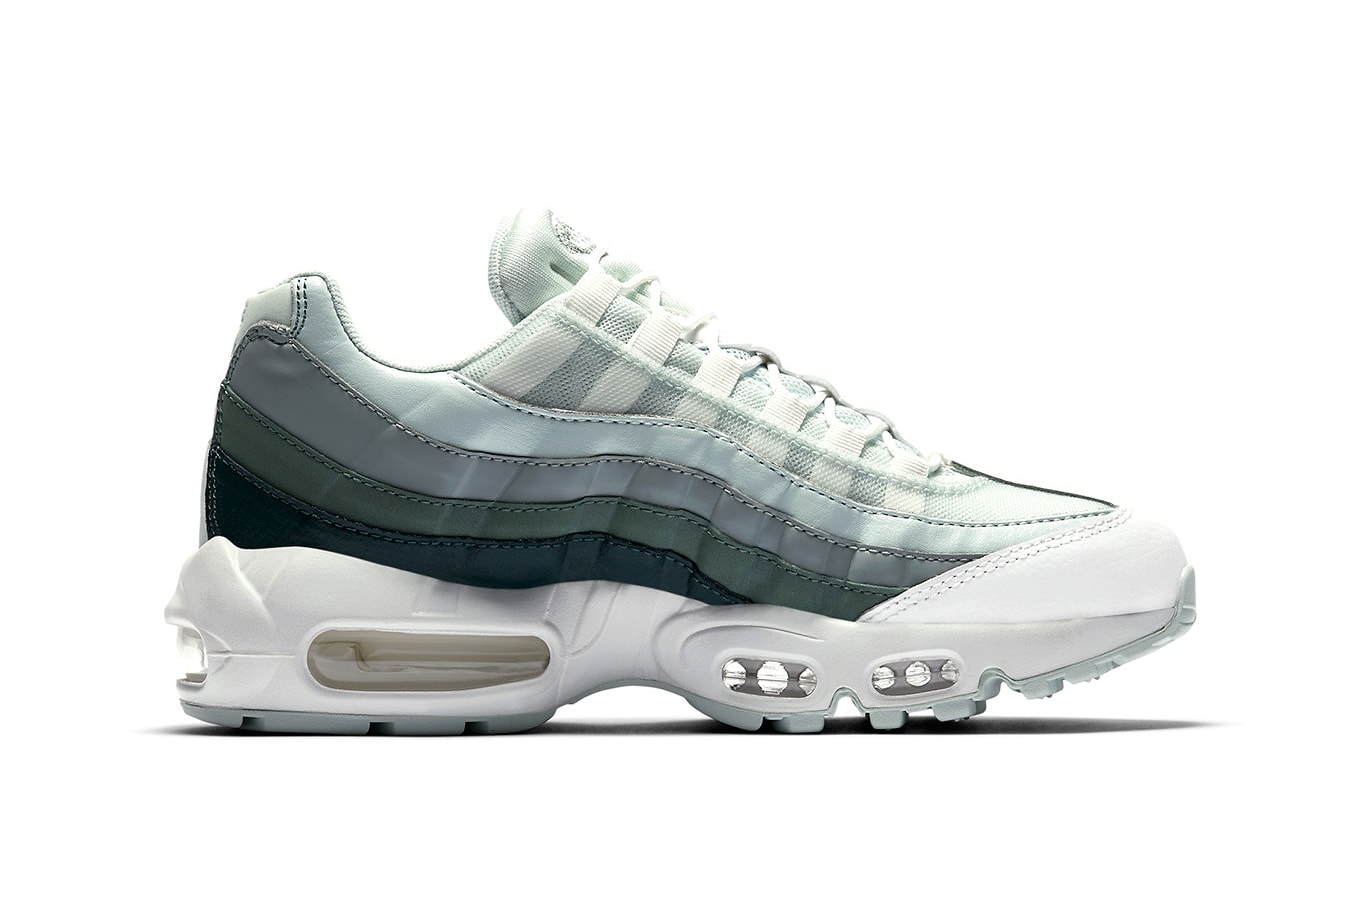 Nike Air Max 95 Clay Green Light Pumice Barely Grey footwear sneakers spring 2018